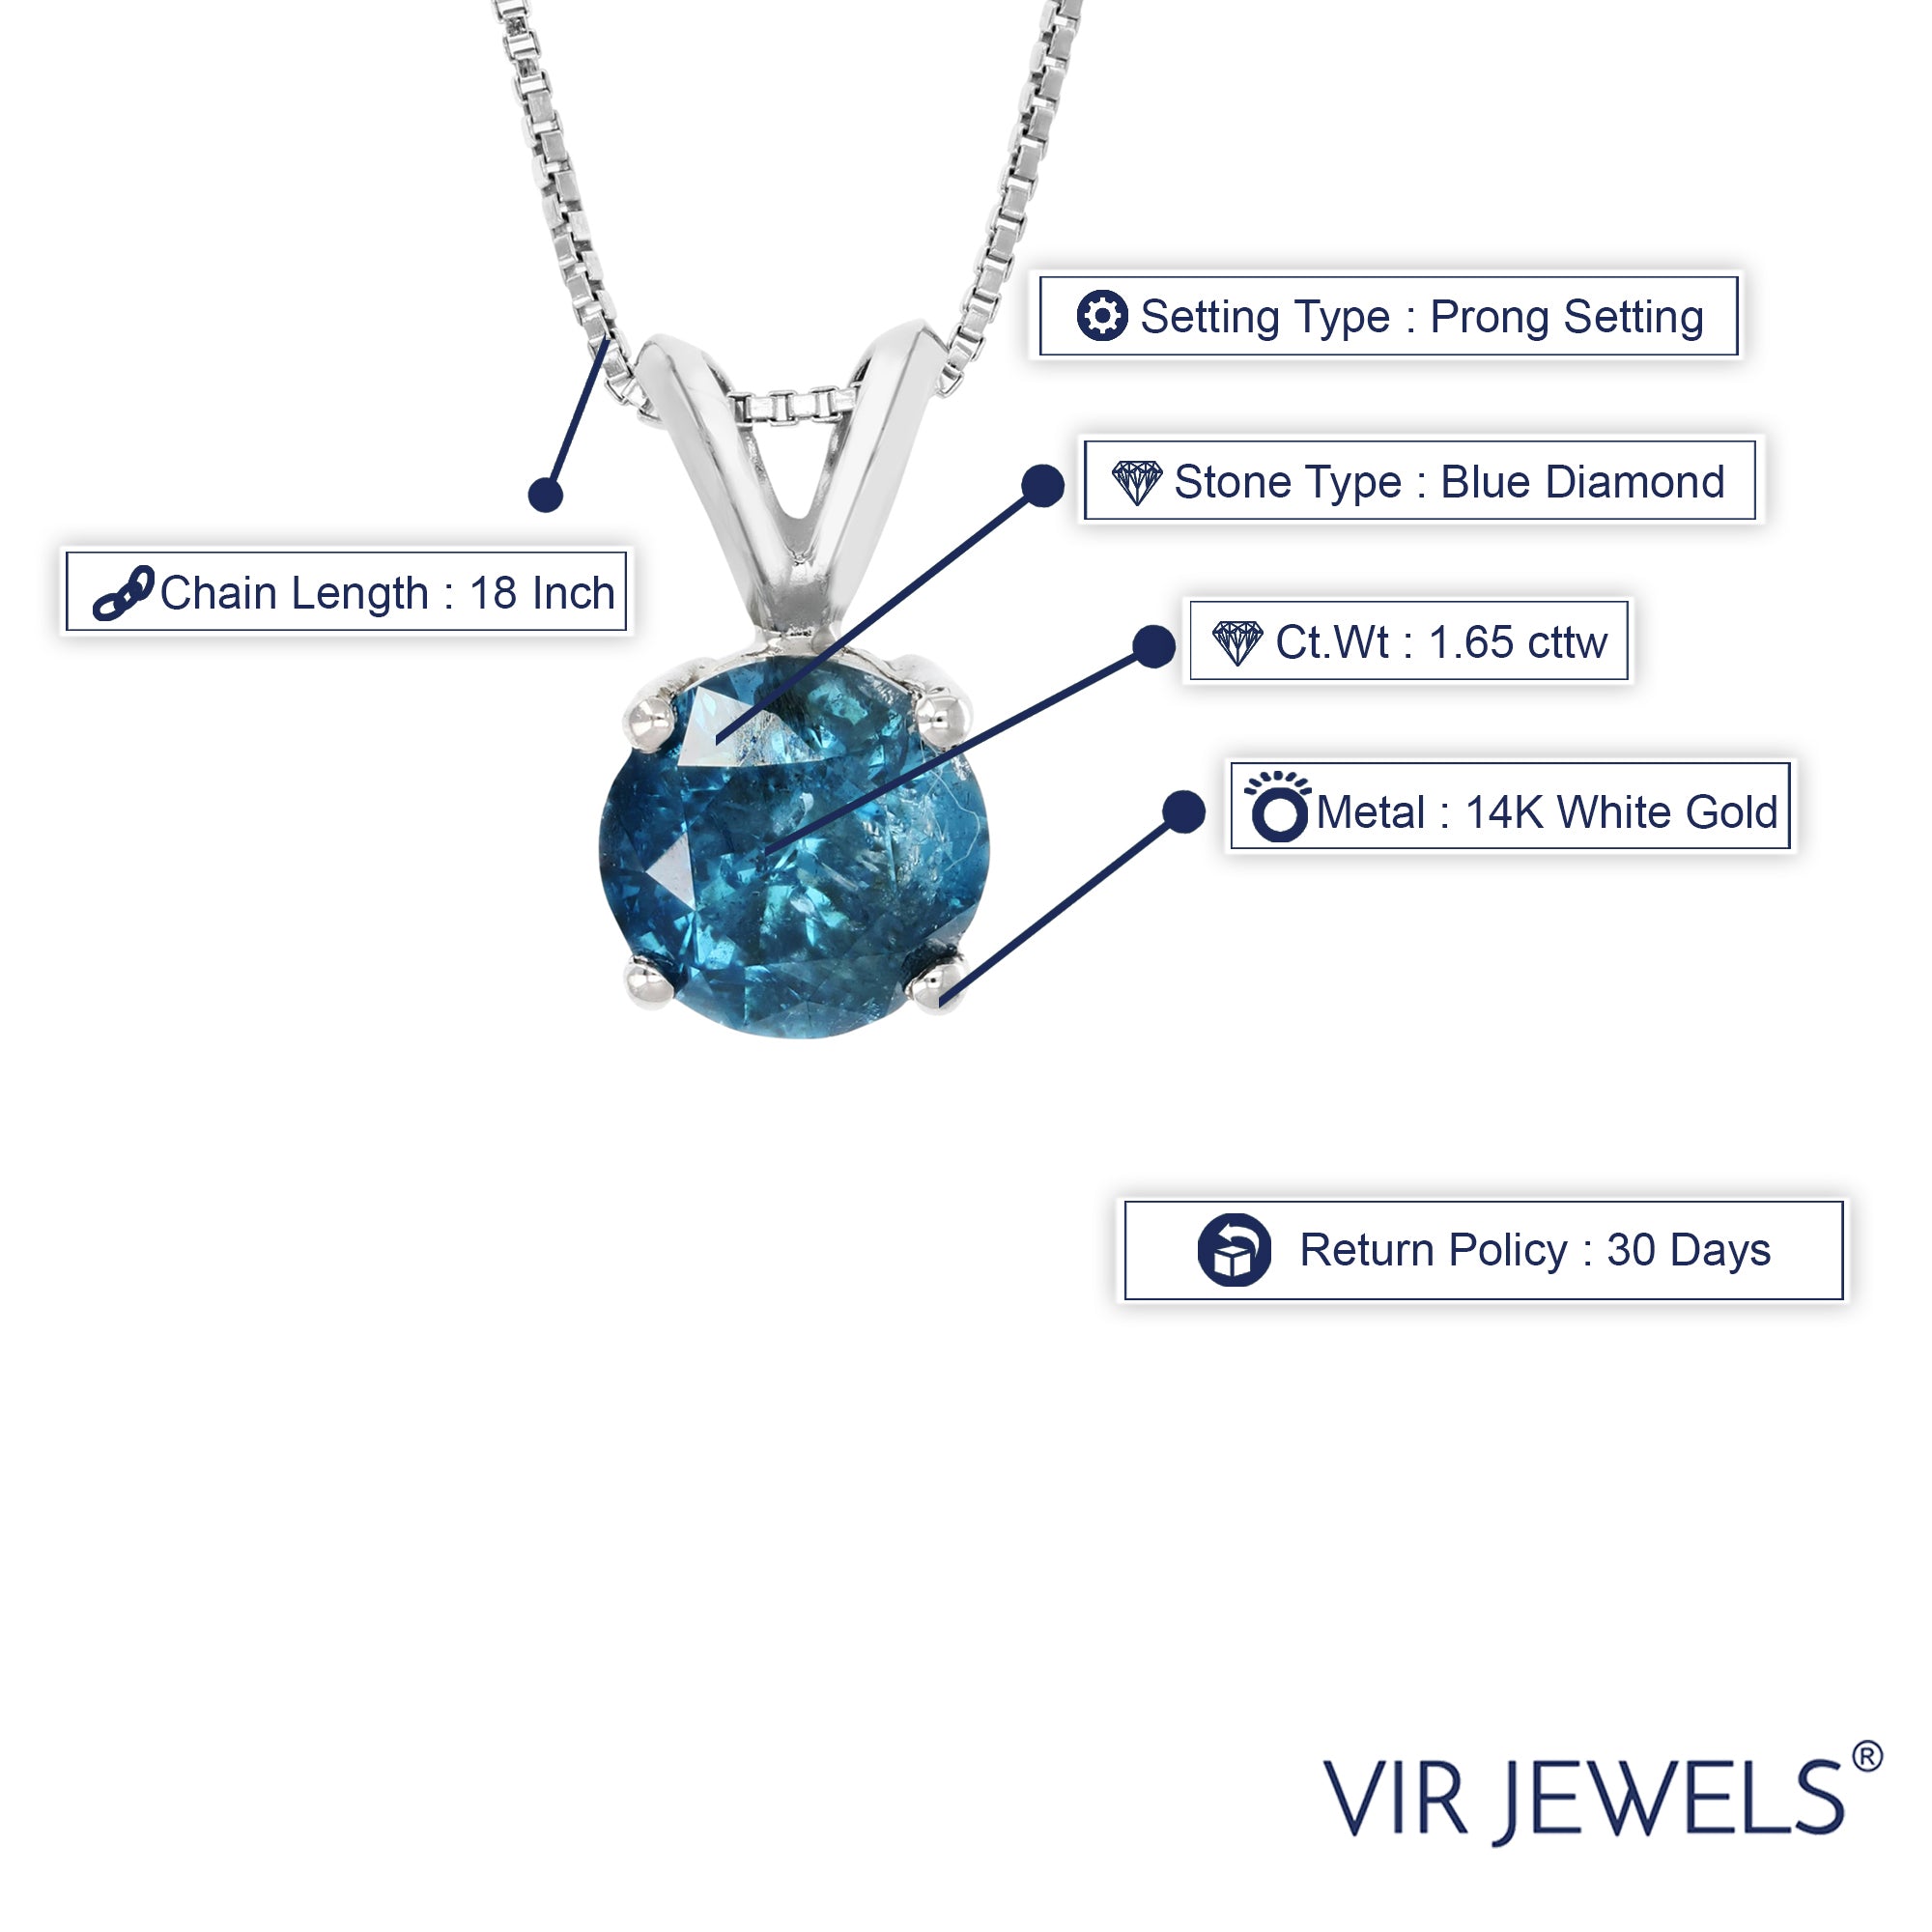 1.65 cttw Diamond Pendant, Blue Diamond Solitaire Pendant Necklace for Women in 14K White Gold with 18 Inch Chain, Prong Setting